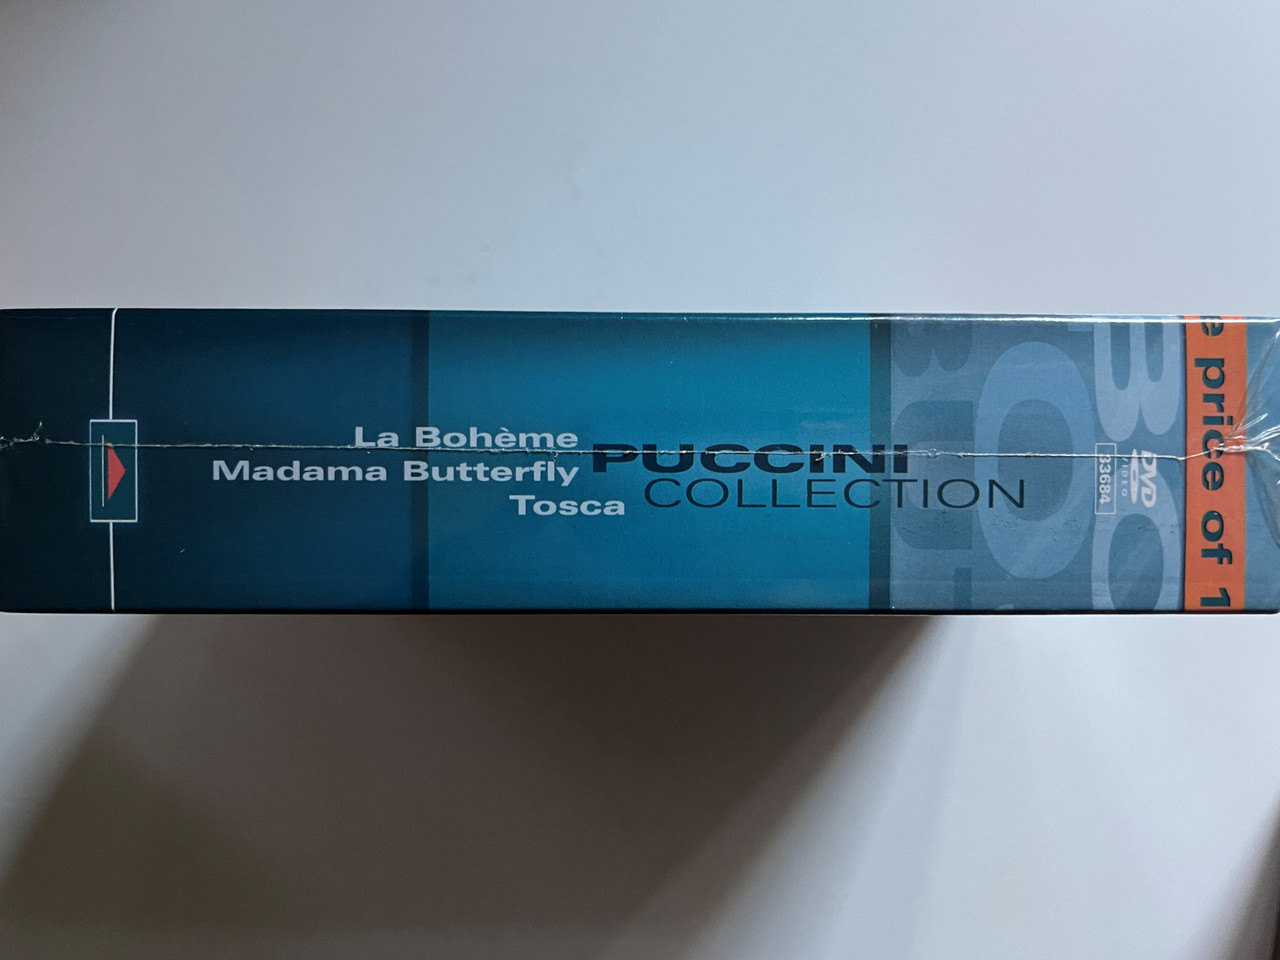 Puccini_Collection_La_Bohme_-_Madama_Butterfly_-_Tosca_3_DVDs_for_the_price_of_1_Puccini_Festival_Foundation_Orchestra_and_Chorus_of_the_Puccini_Festival_Placido_Domingo_1__59617.1691404147.1280.1280.jpg (1280×960)